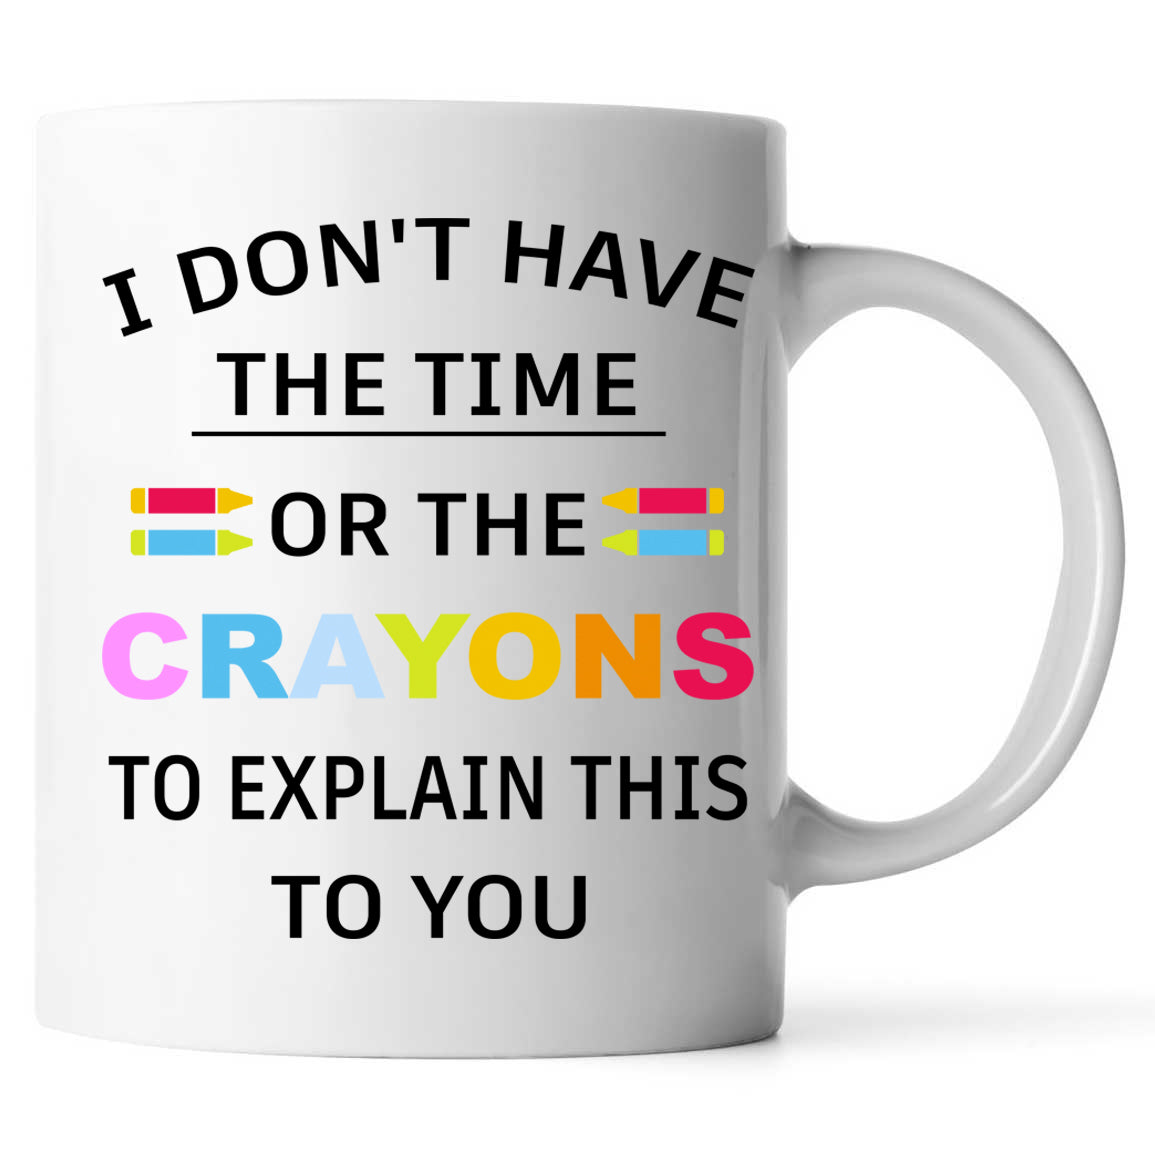 I Don't Have The Time Or The Crayons To Explain This To You Coffee Mug